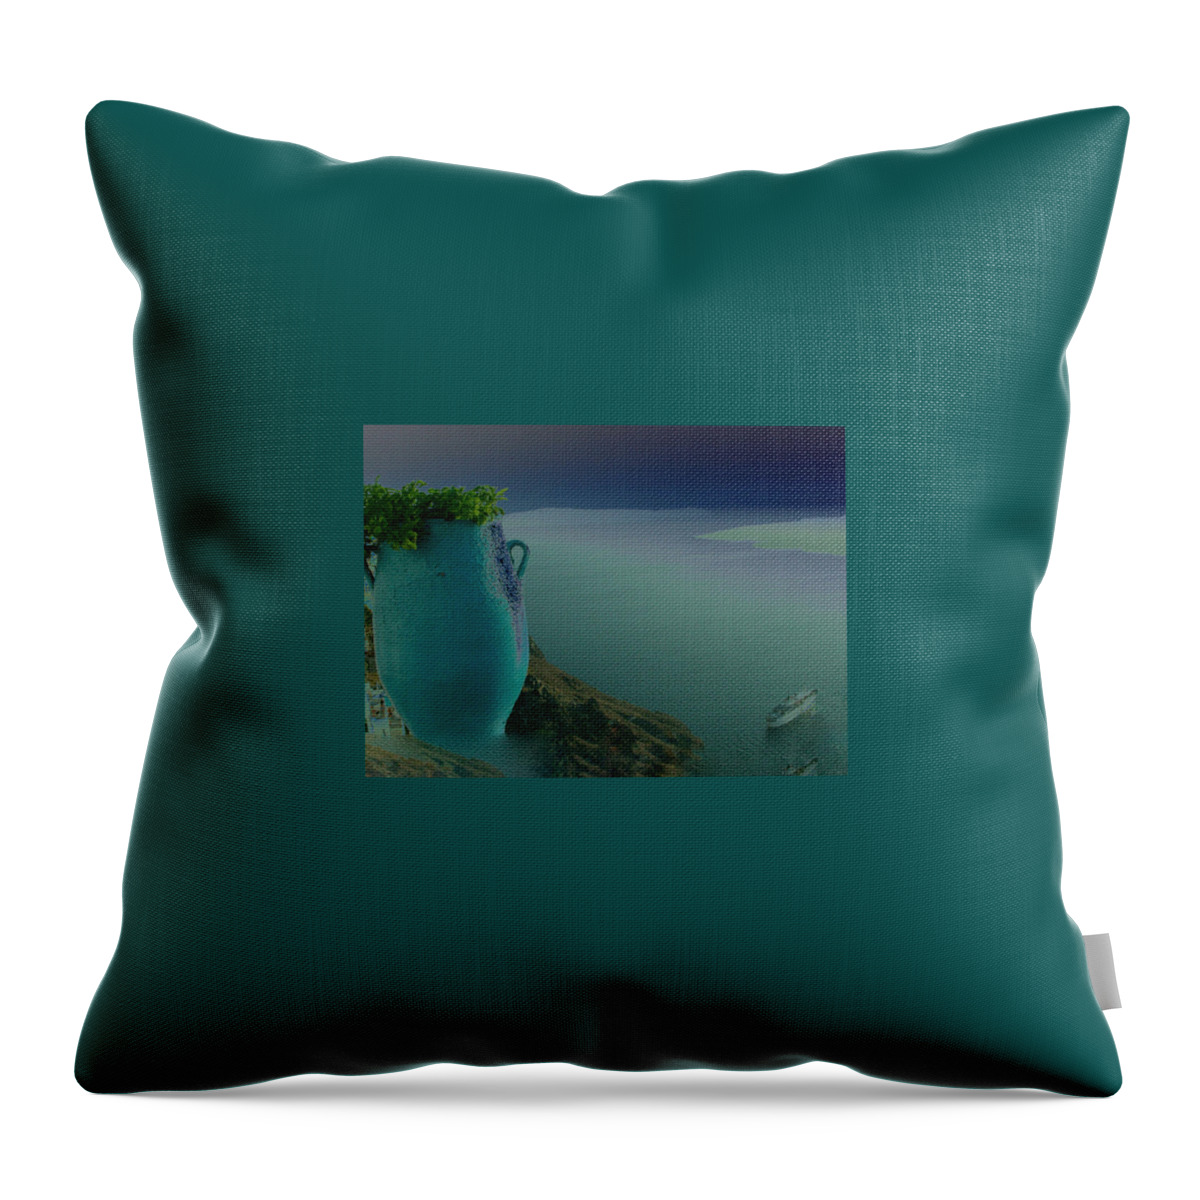 Colette Throw Pillow featuring the photograph Fira view Santorini Greece by Colette V Hera Guggenheim